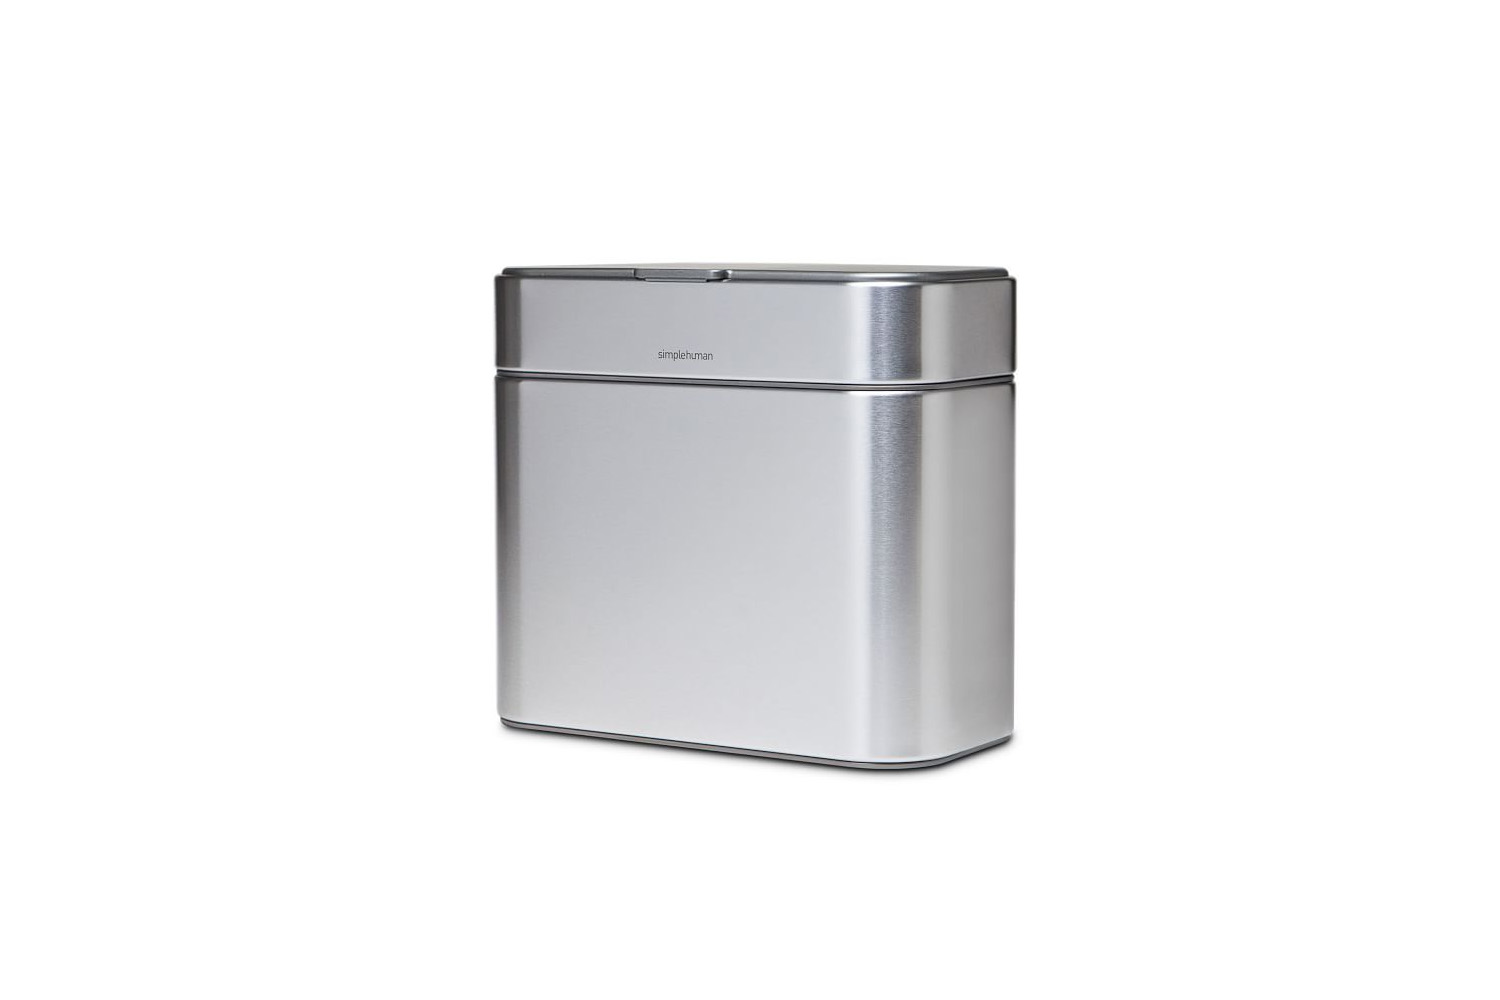 For a classic kitchen compost option, the Simplehuman Compost Caddy is \$50 at West Elm.